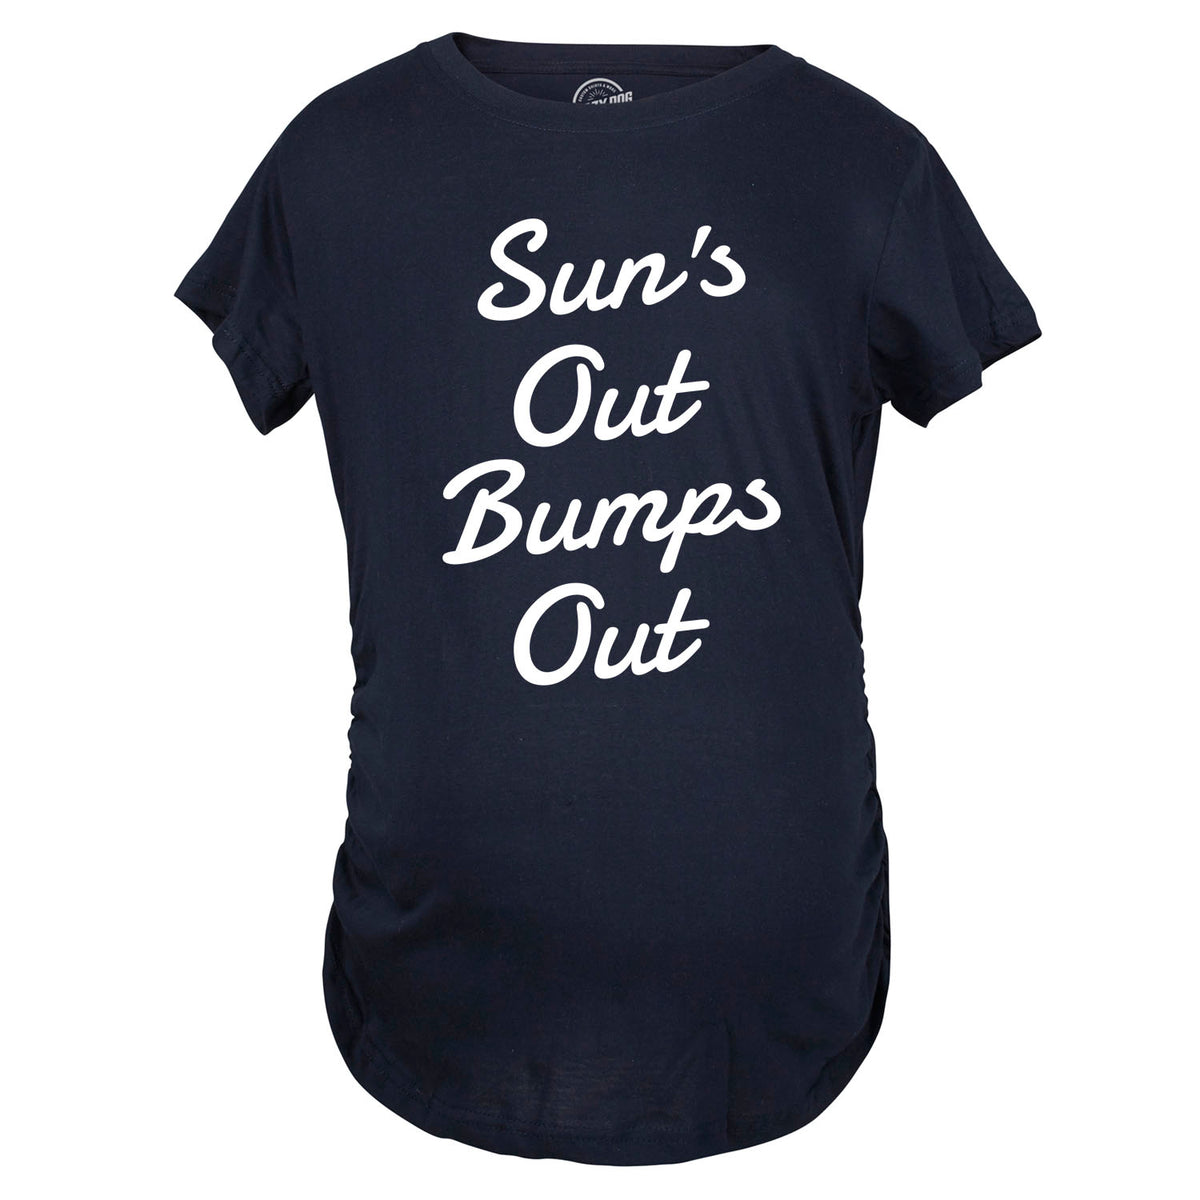 Suns Out Bumps Out Maternity Tshirt